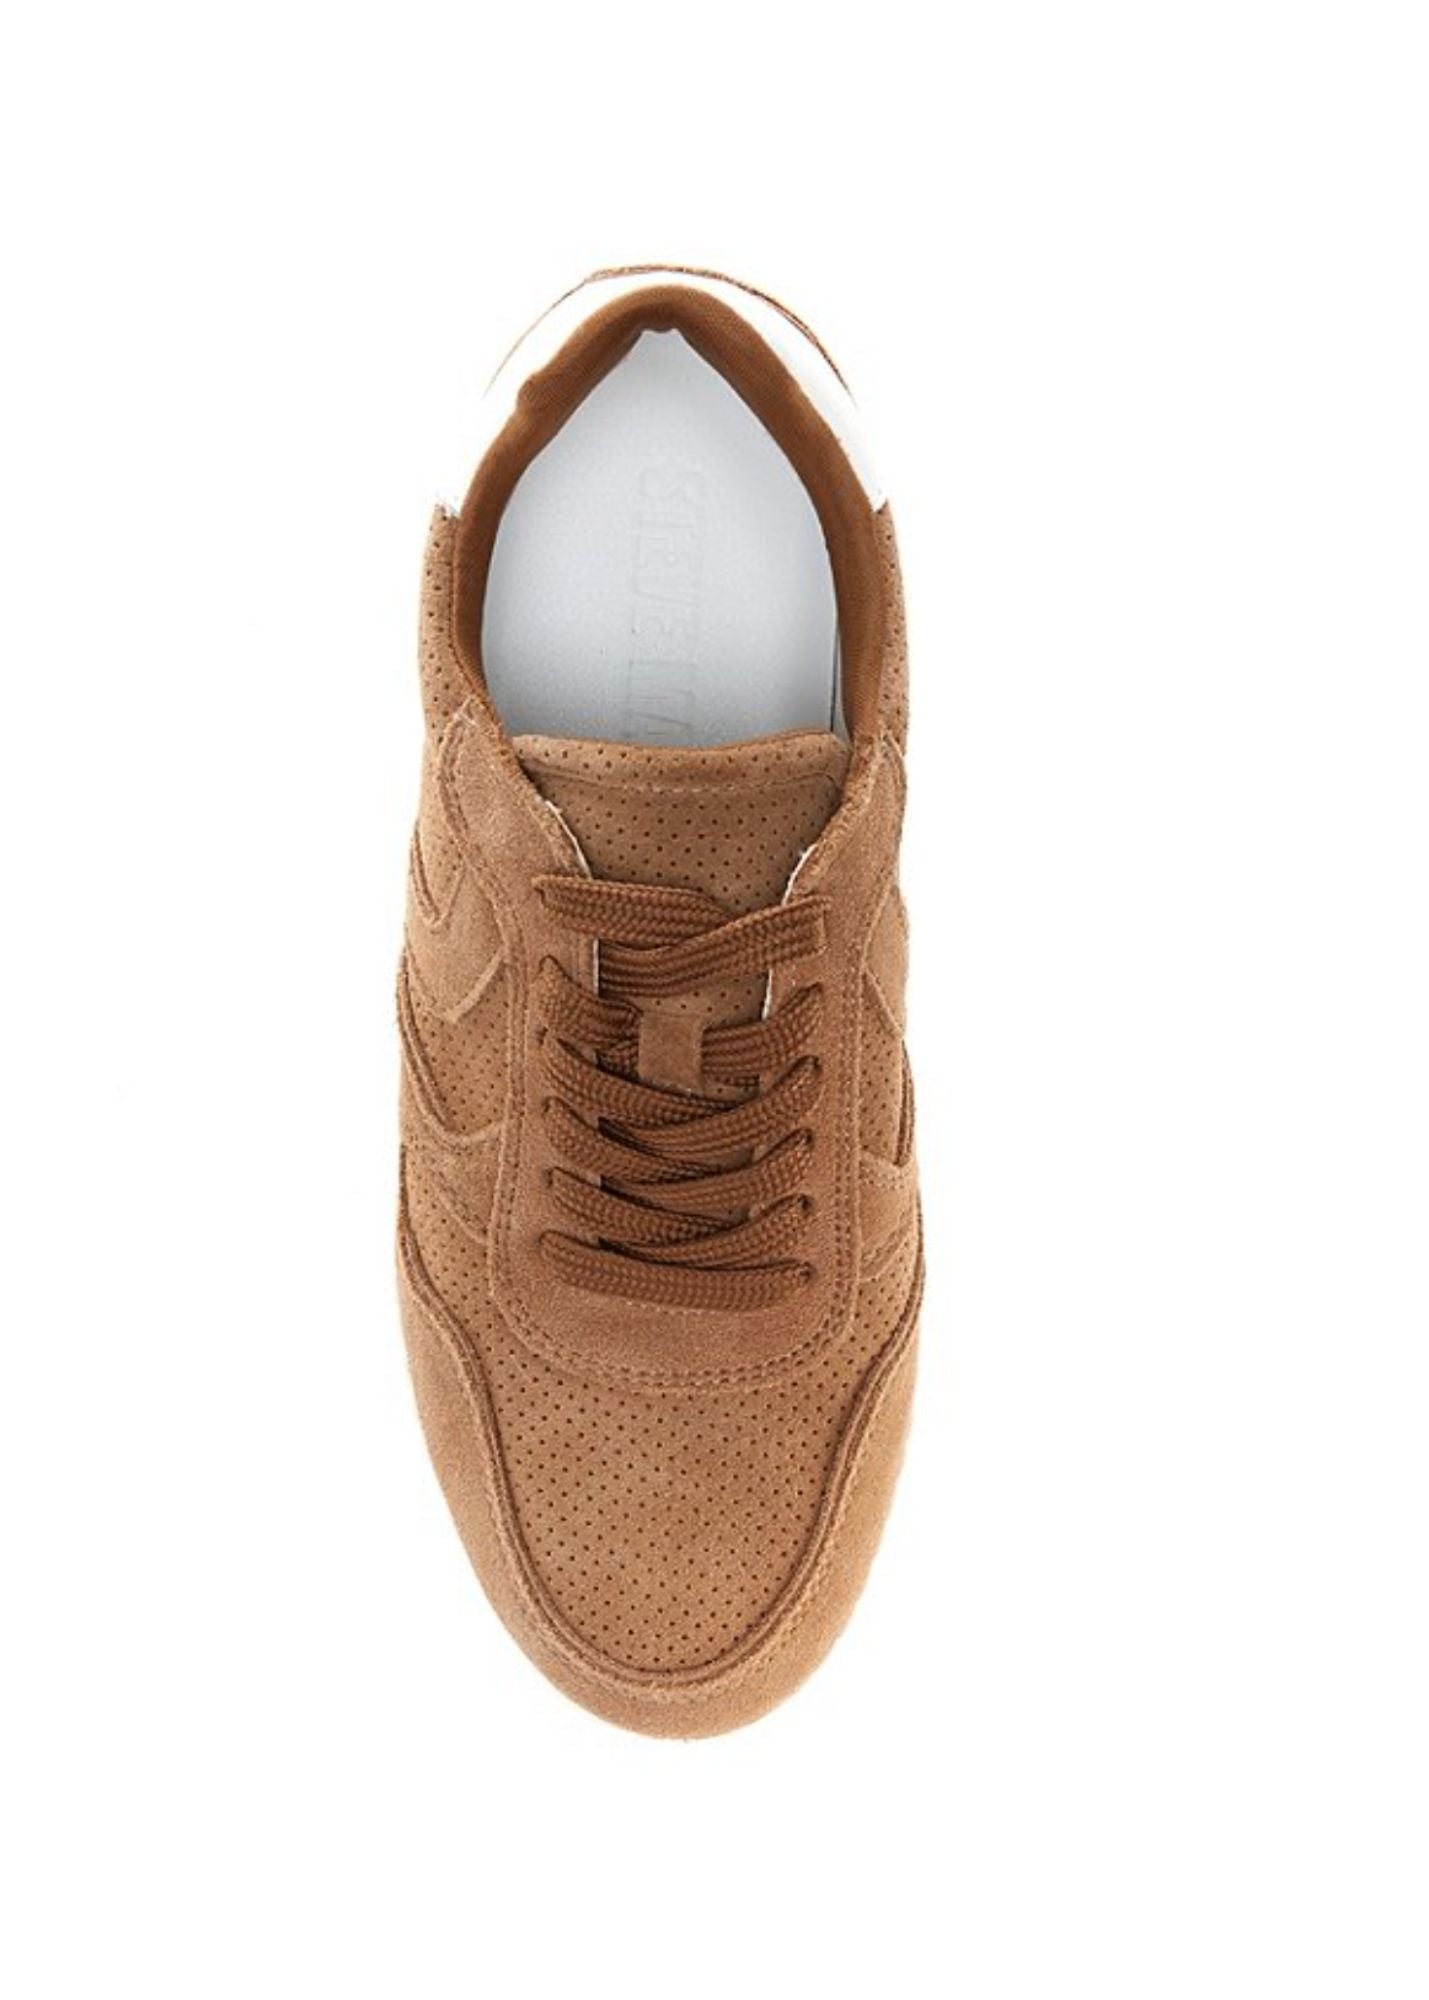 Steve Madden Shereen Suede Sneakers Shoes